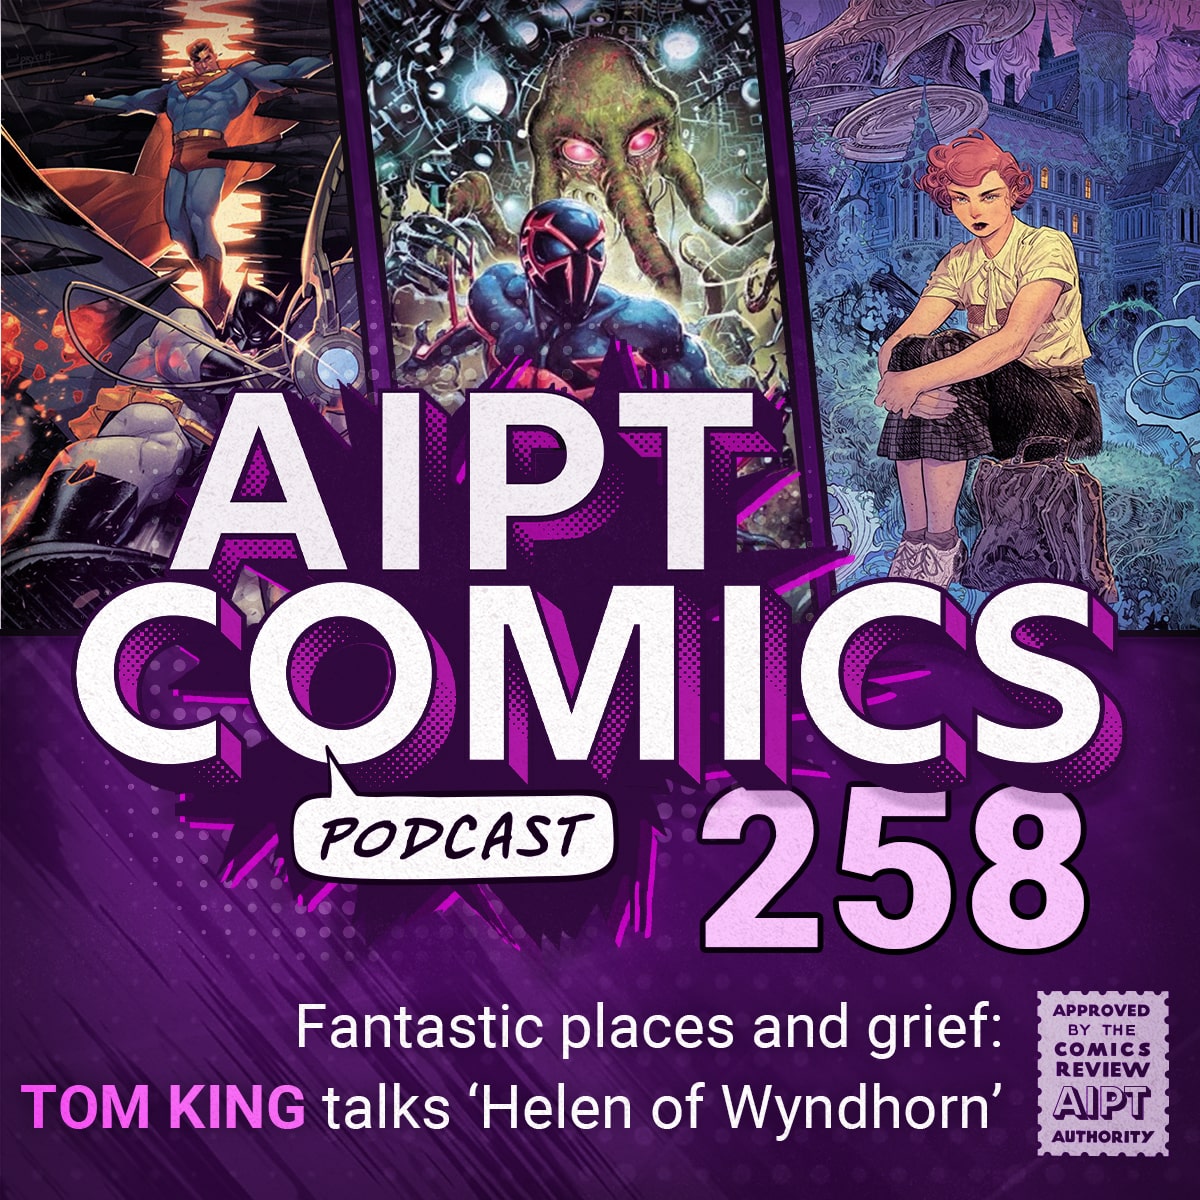 AIPT Comics Podcast Episode 258: Fantastic places and grief: Tom King talks ‘Helen of Wyndhorn’